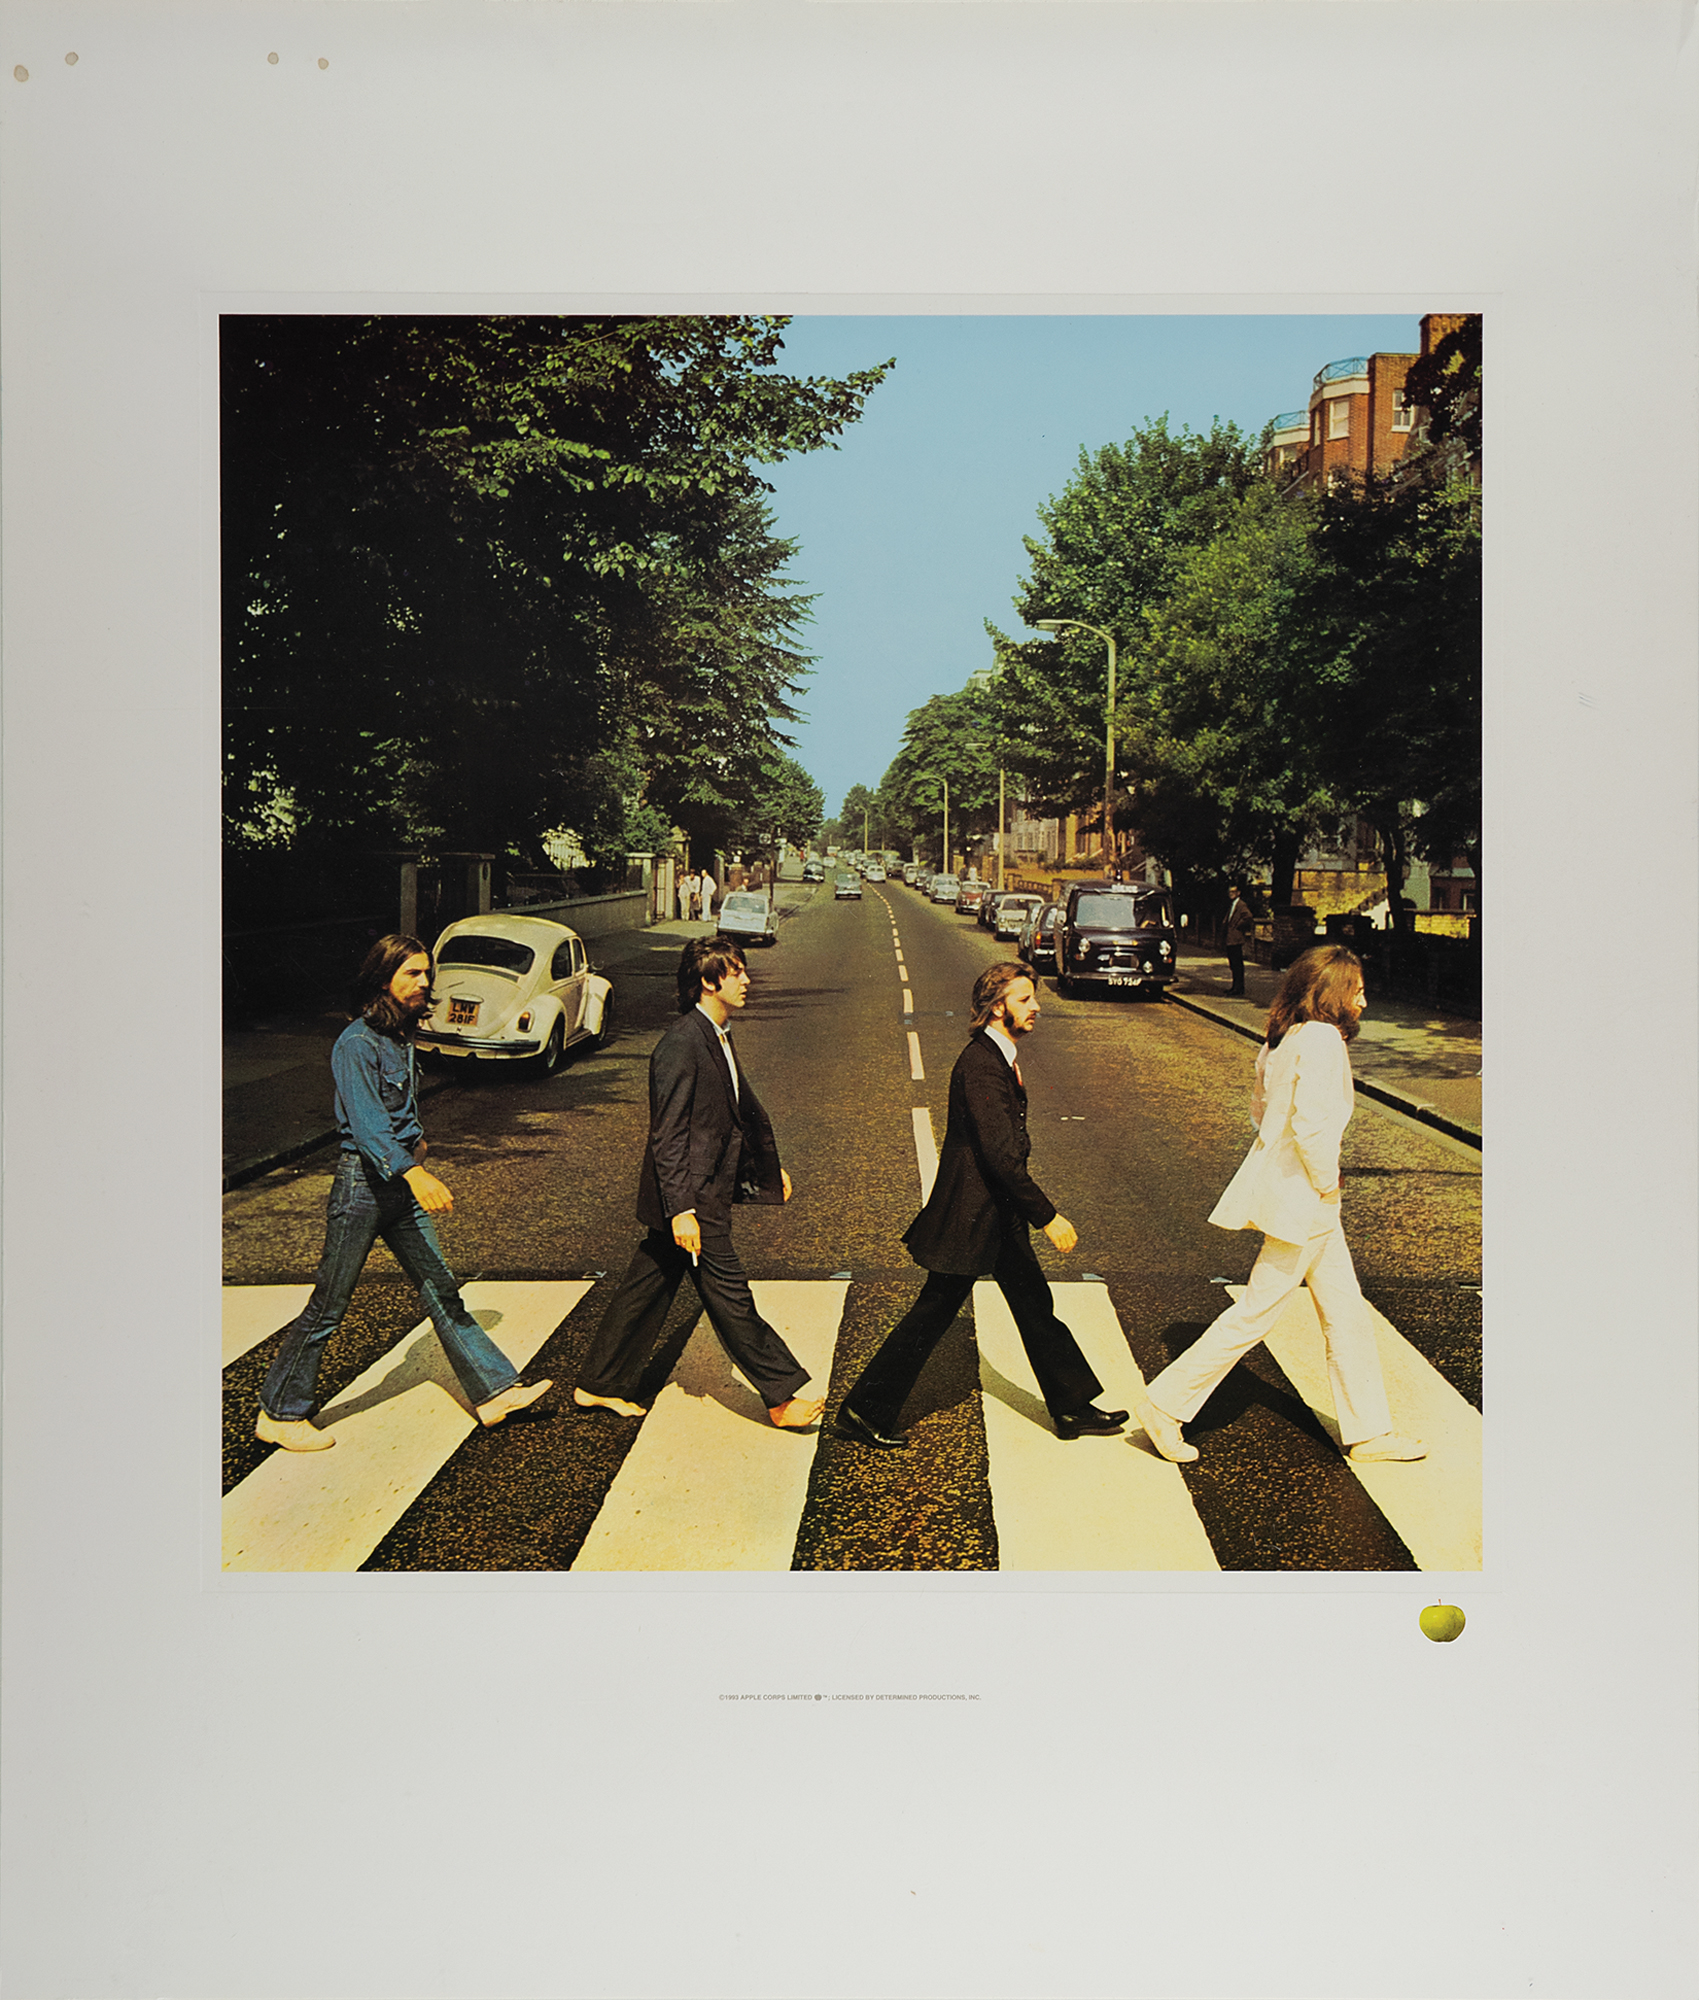 Beatles Abbey Road Iconic Album Cover Lithograph